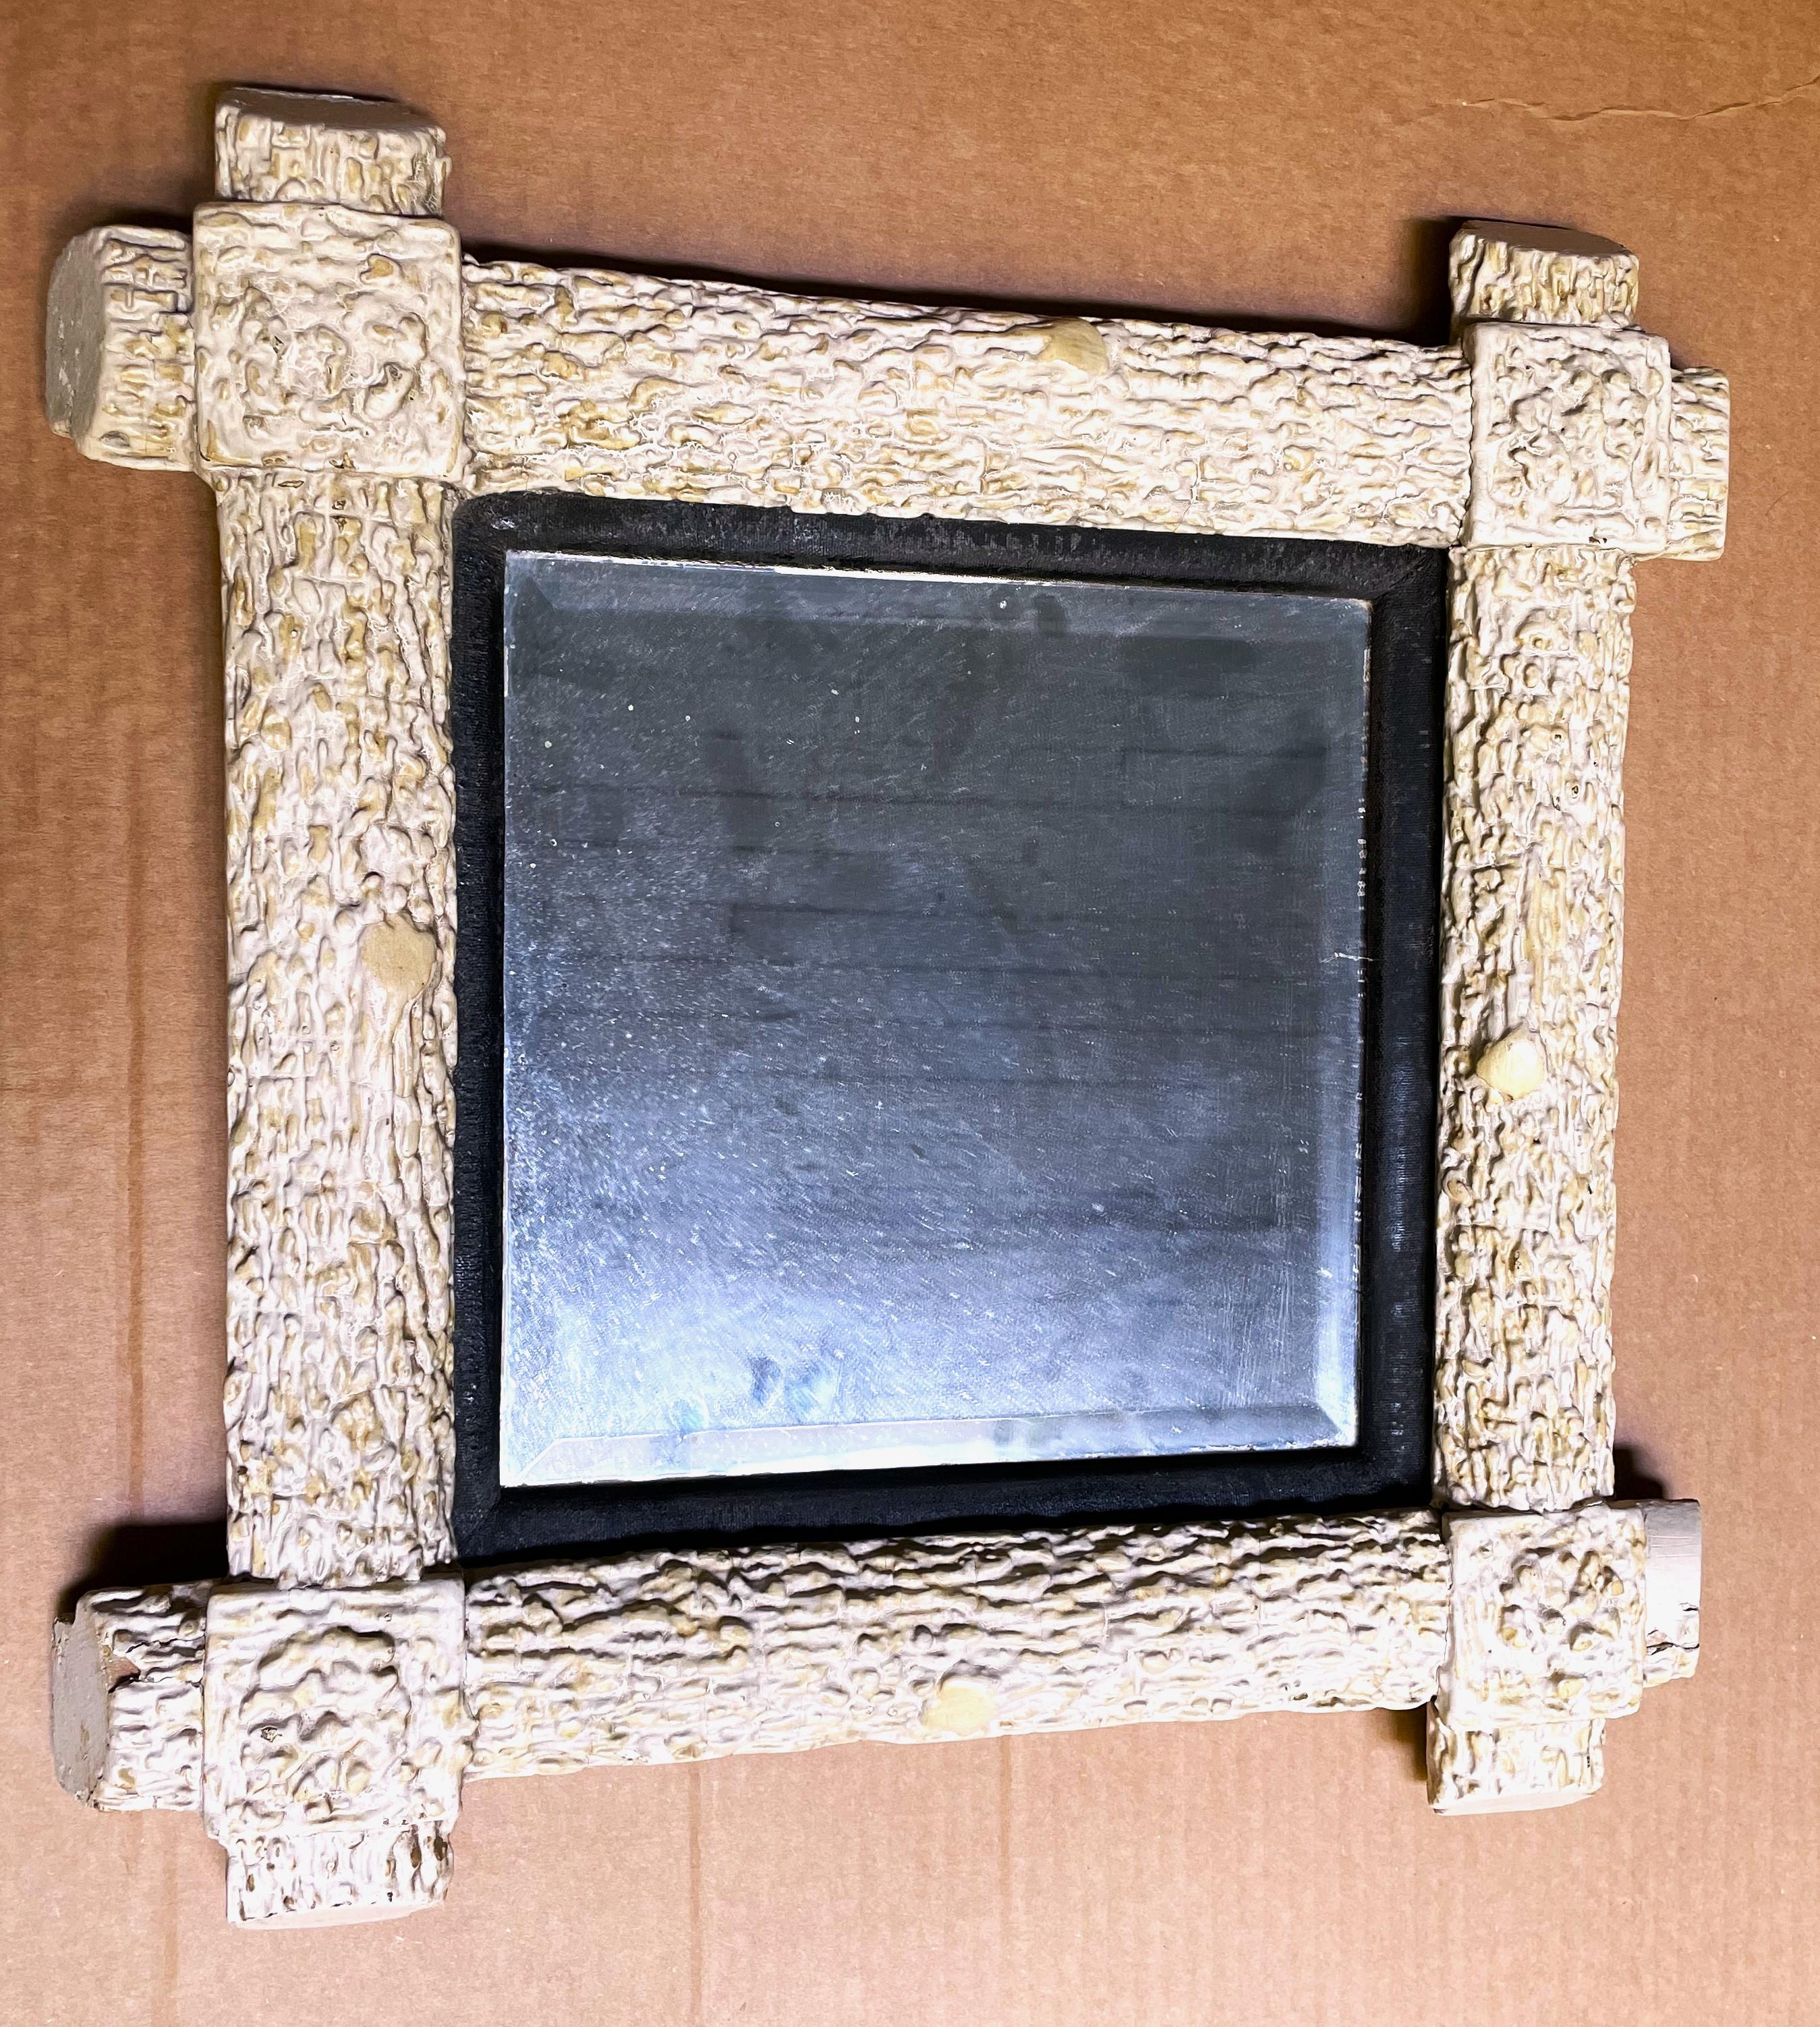 This is the sweetest 18 inch square wooden frame with a faux bois molded decoration. It would be fabulous in a rustic, Adirondack, shabby or white painted decor. The wonderful faux bois has been overpainted in the distant past with white, it may